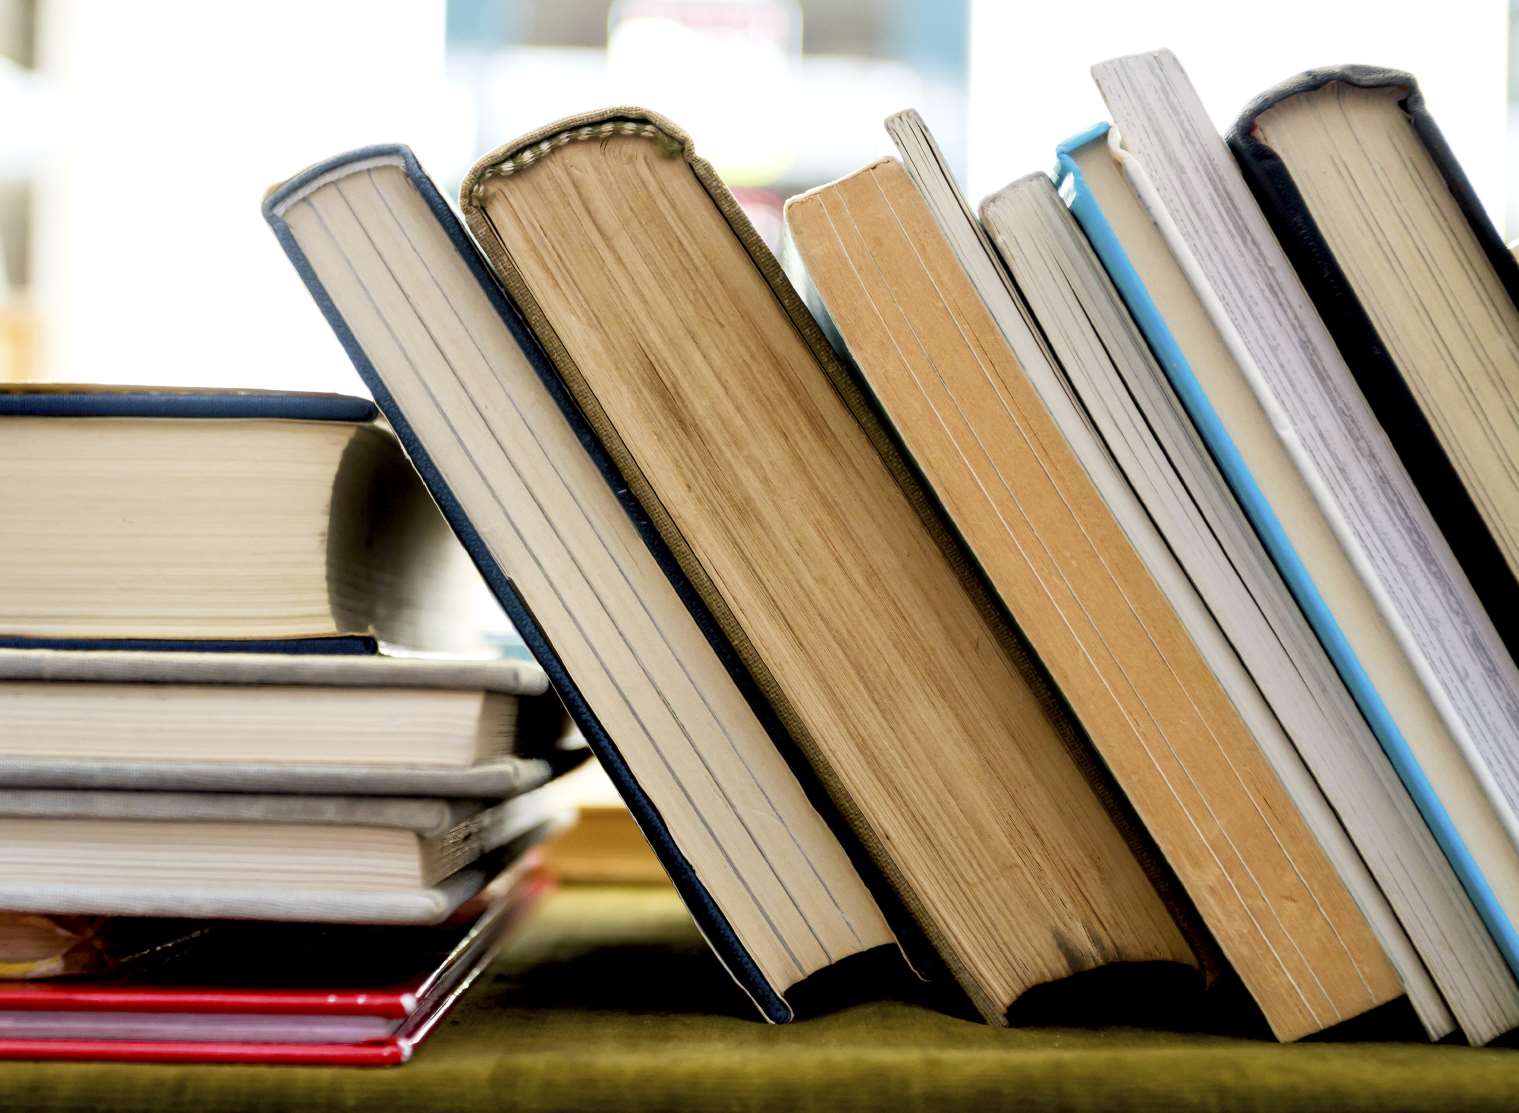 The book sale runs from Monday, March 14 to Saturday, March 19